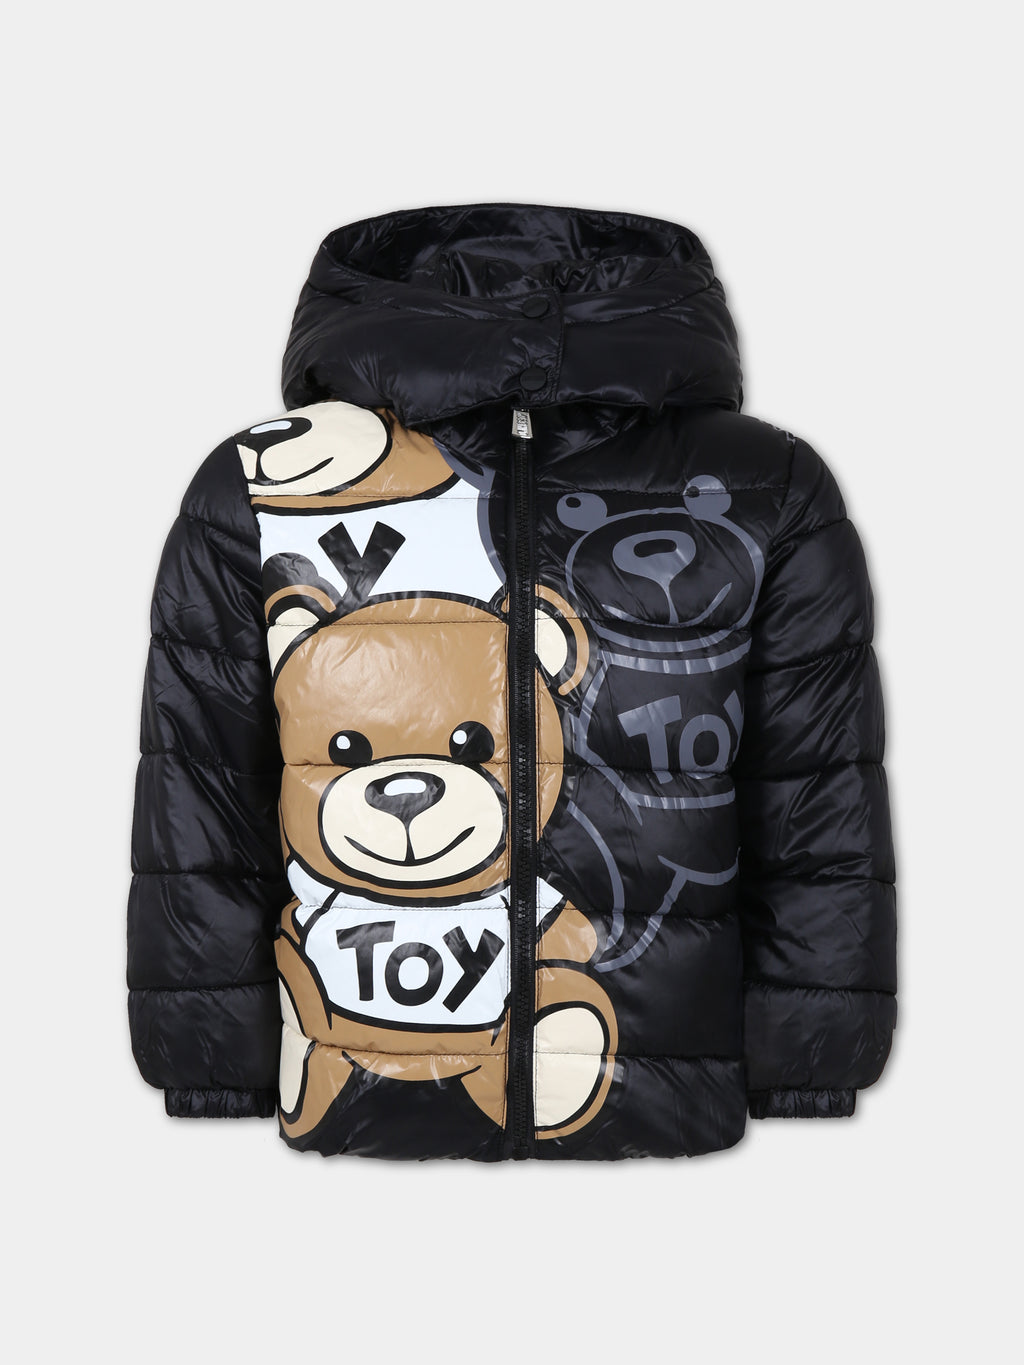 Black down jacket for boy with Teddy Bears and logo